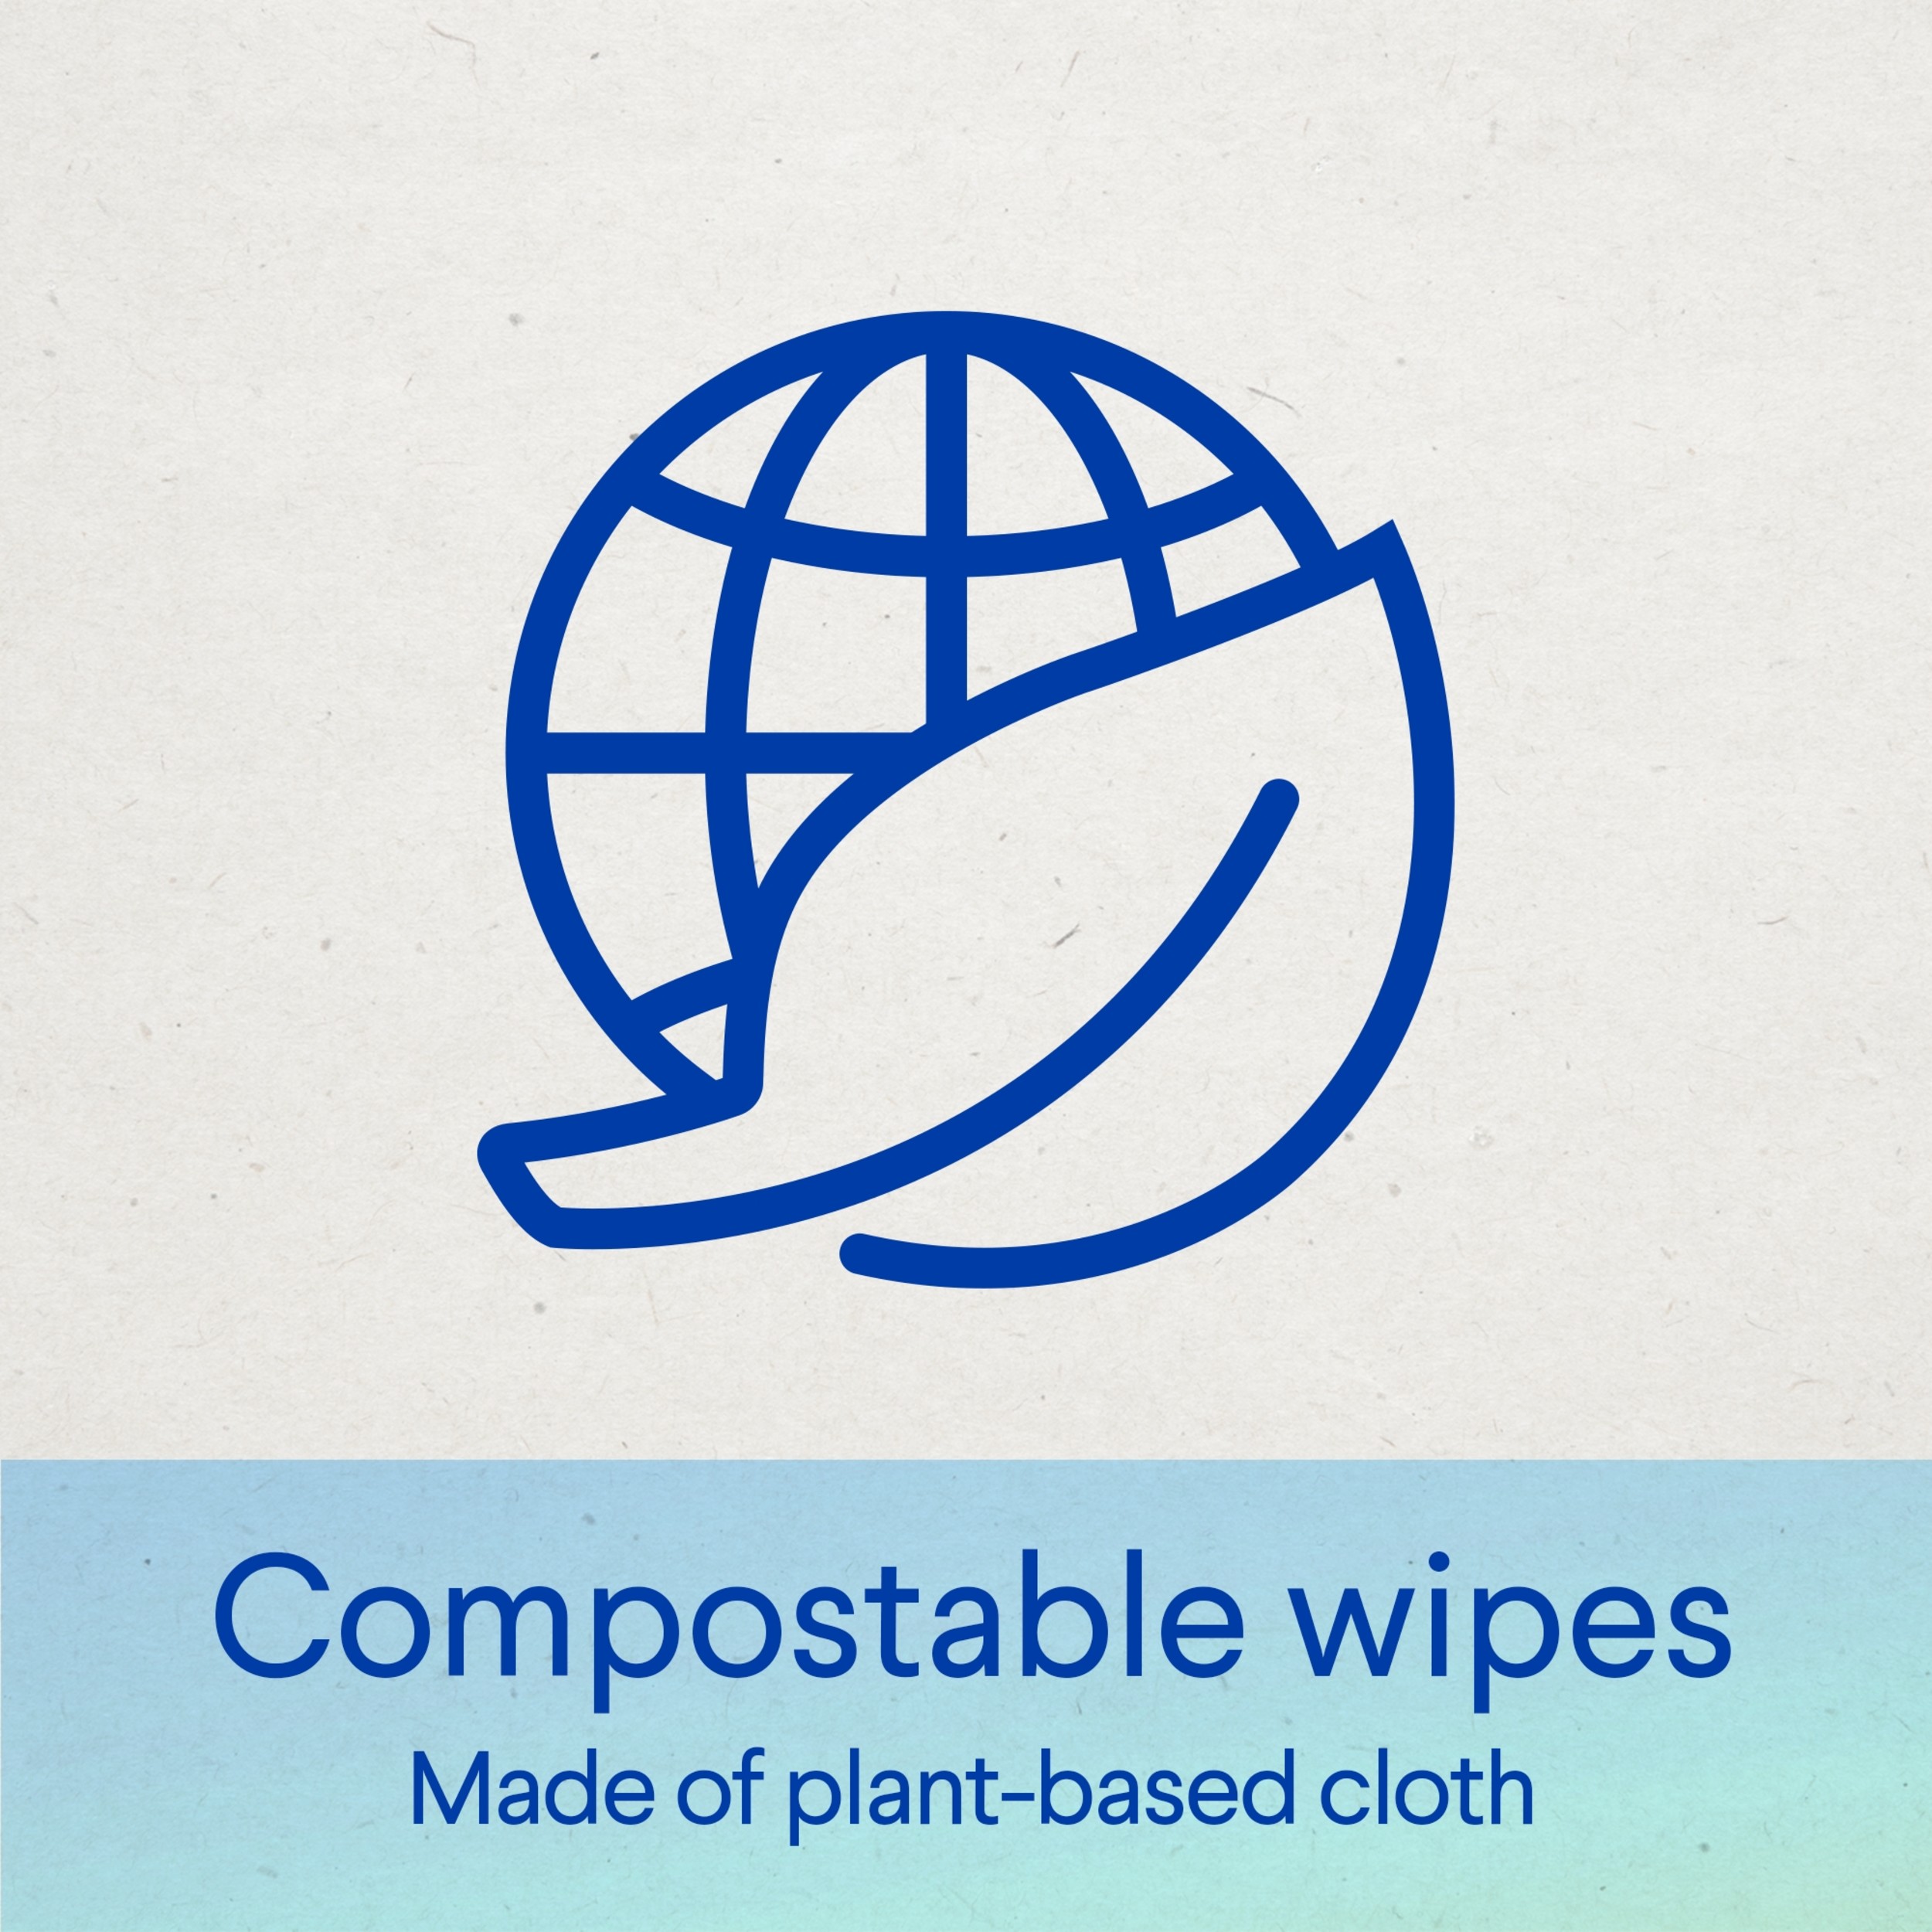 Clorox Compostable Cleaning Wipes - All Purpose Wipes - Unscented, Free & Clear, 35 Count Each - Pack of 3 - image 4 of 12